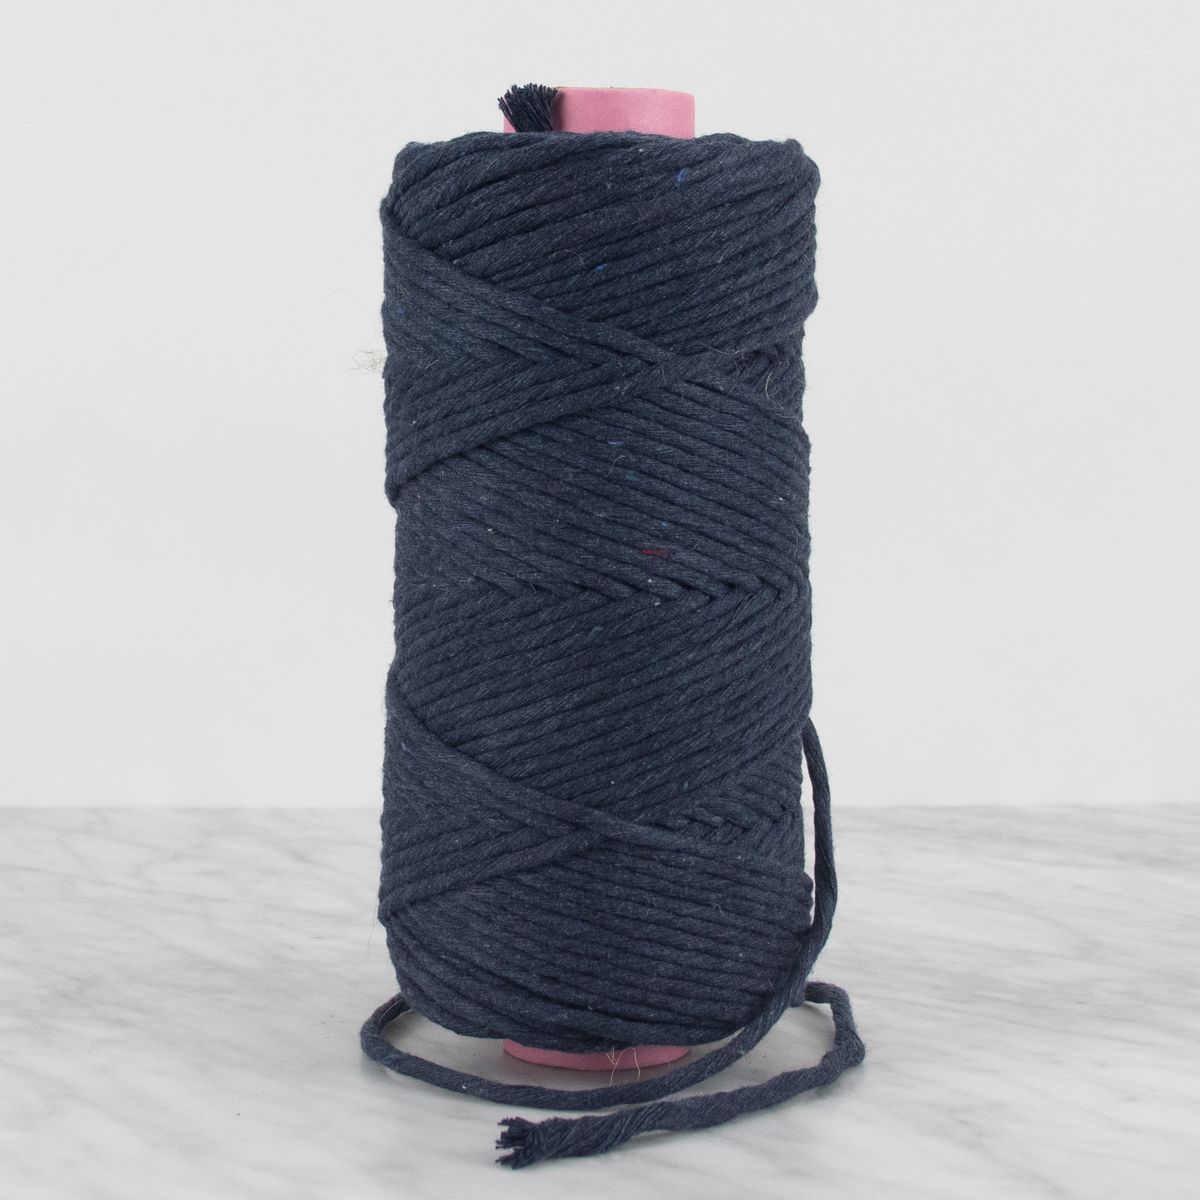 5mm Recycled Cotton String 0.5 kg - Navy